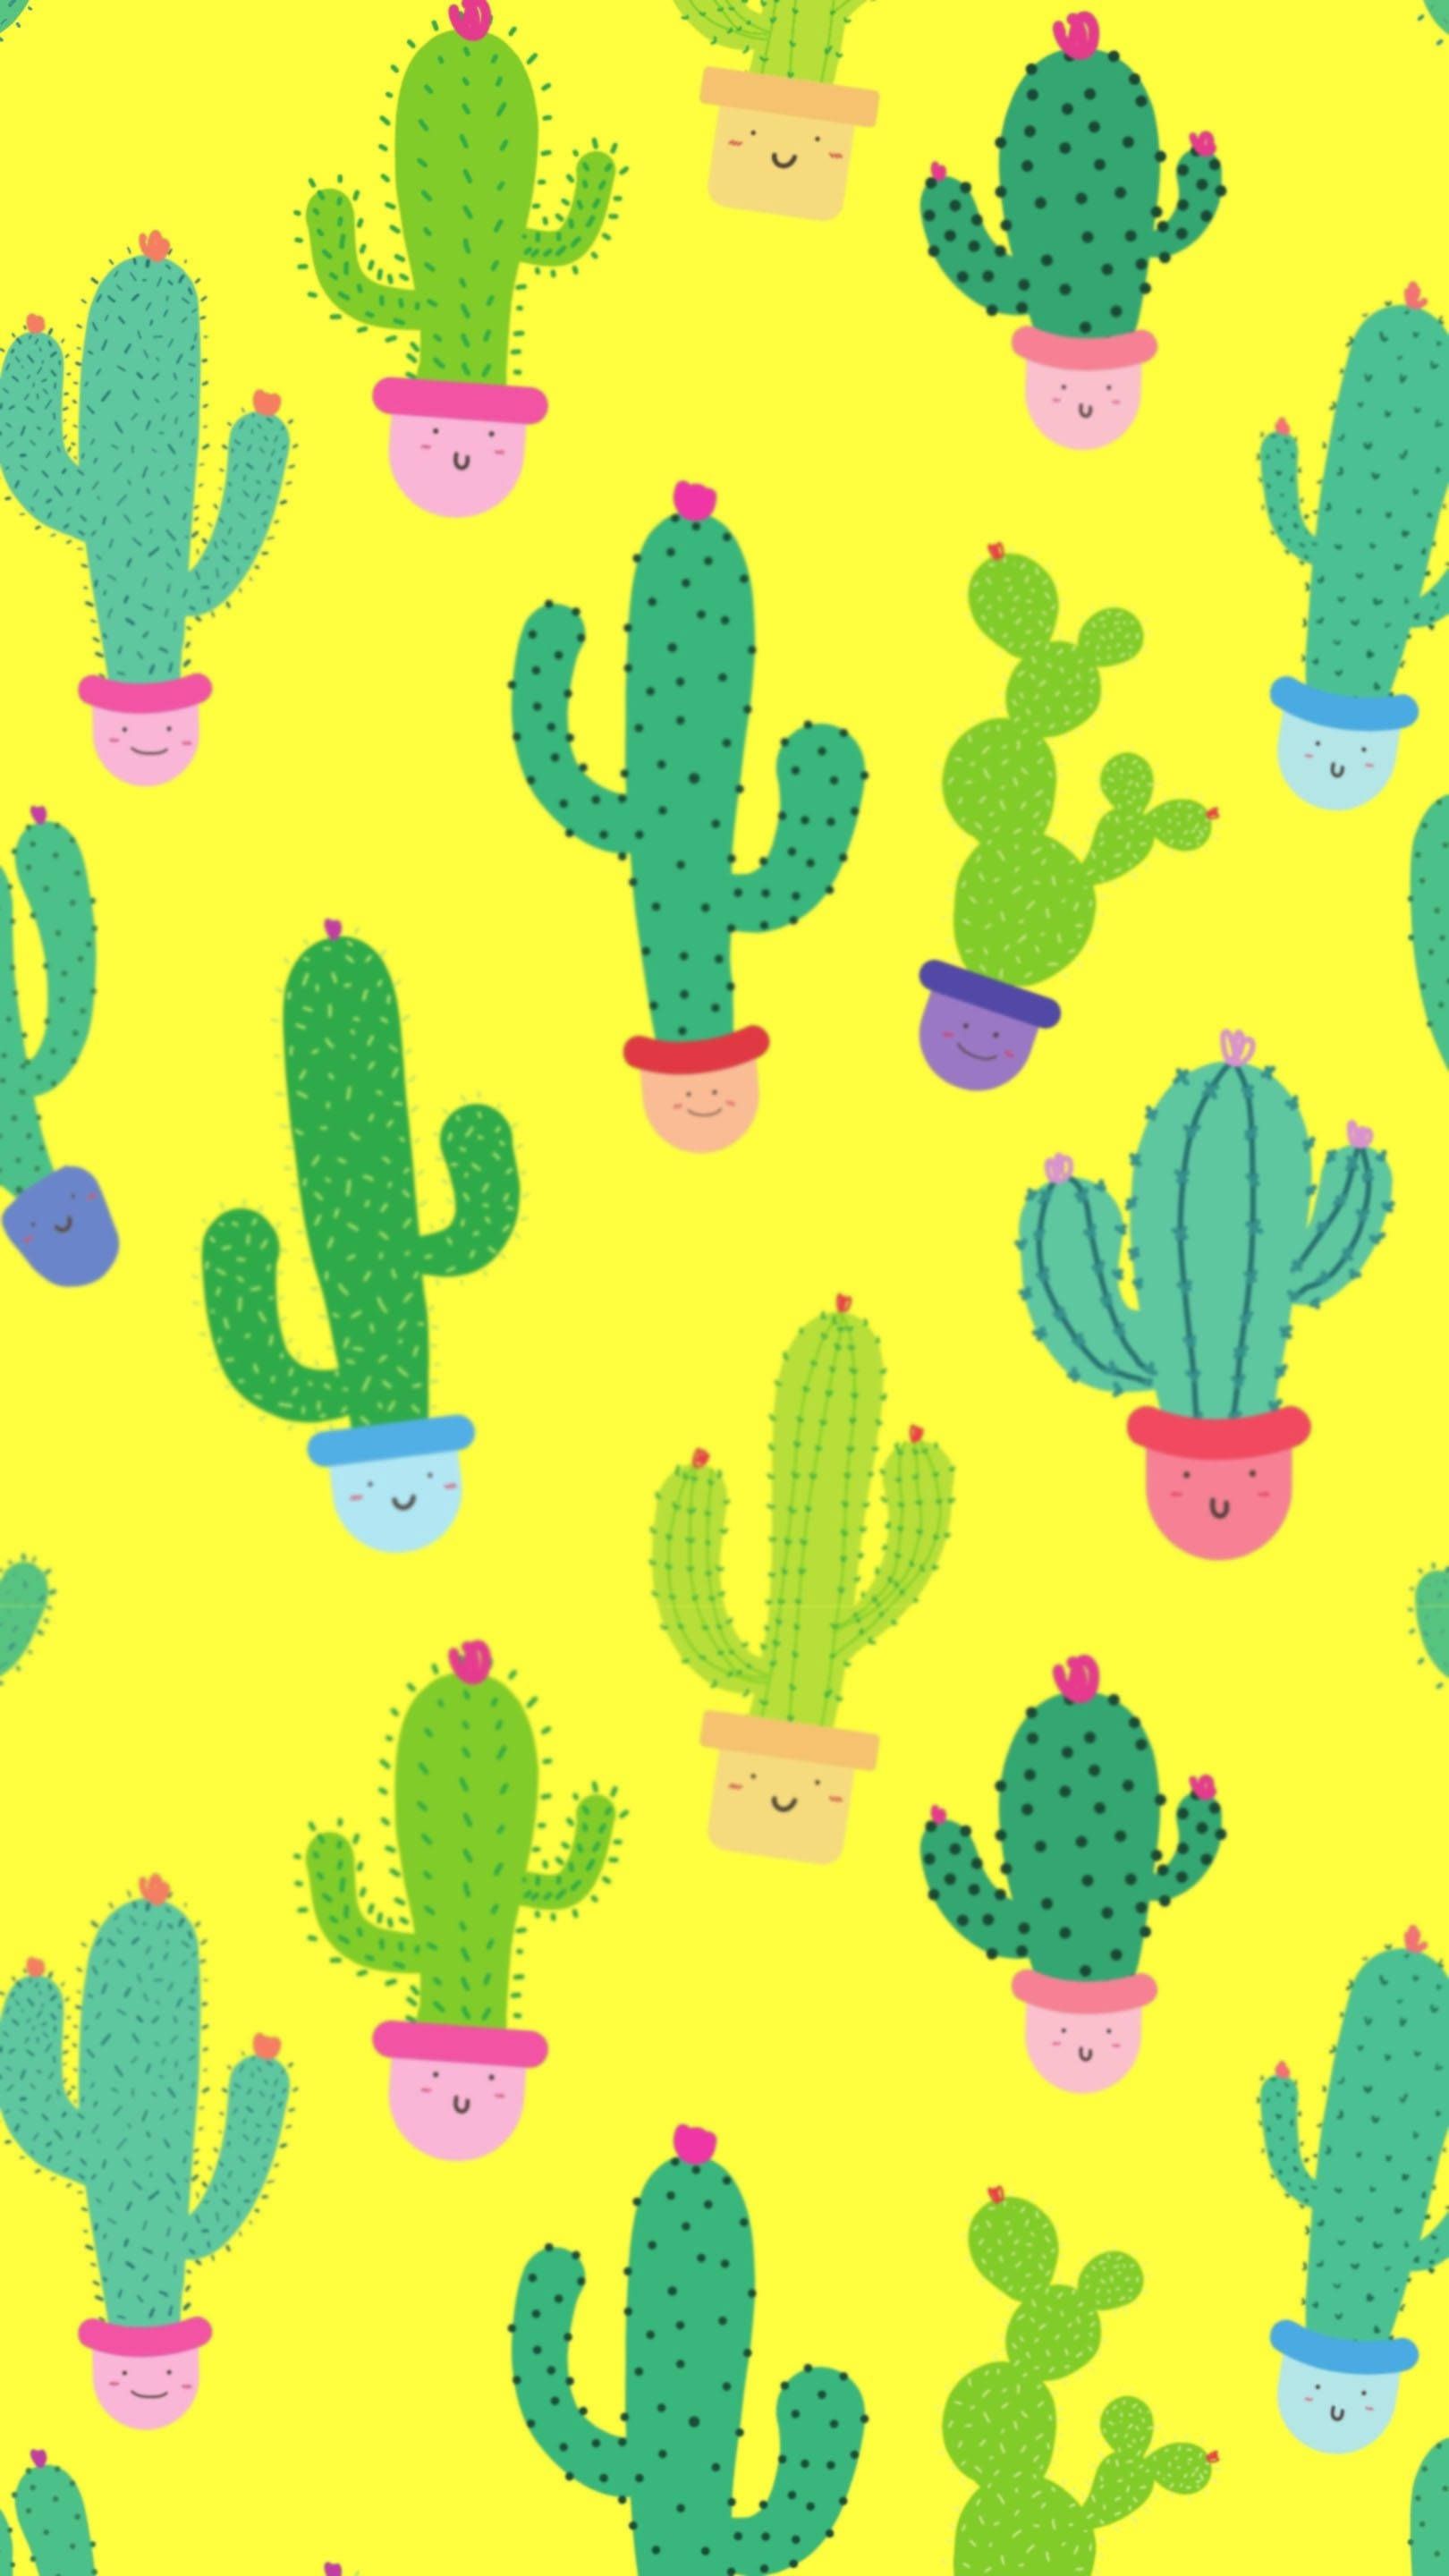 A pattern of cacti on a yellow background - Cactus, succulent